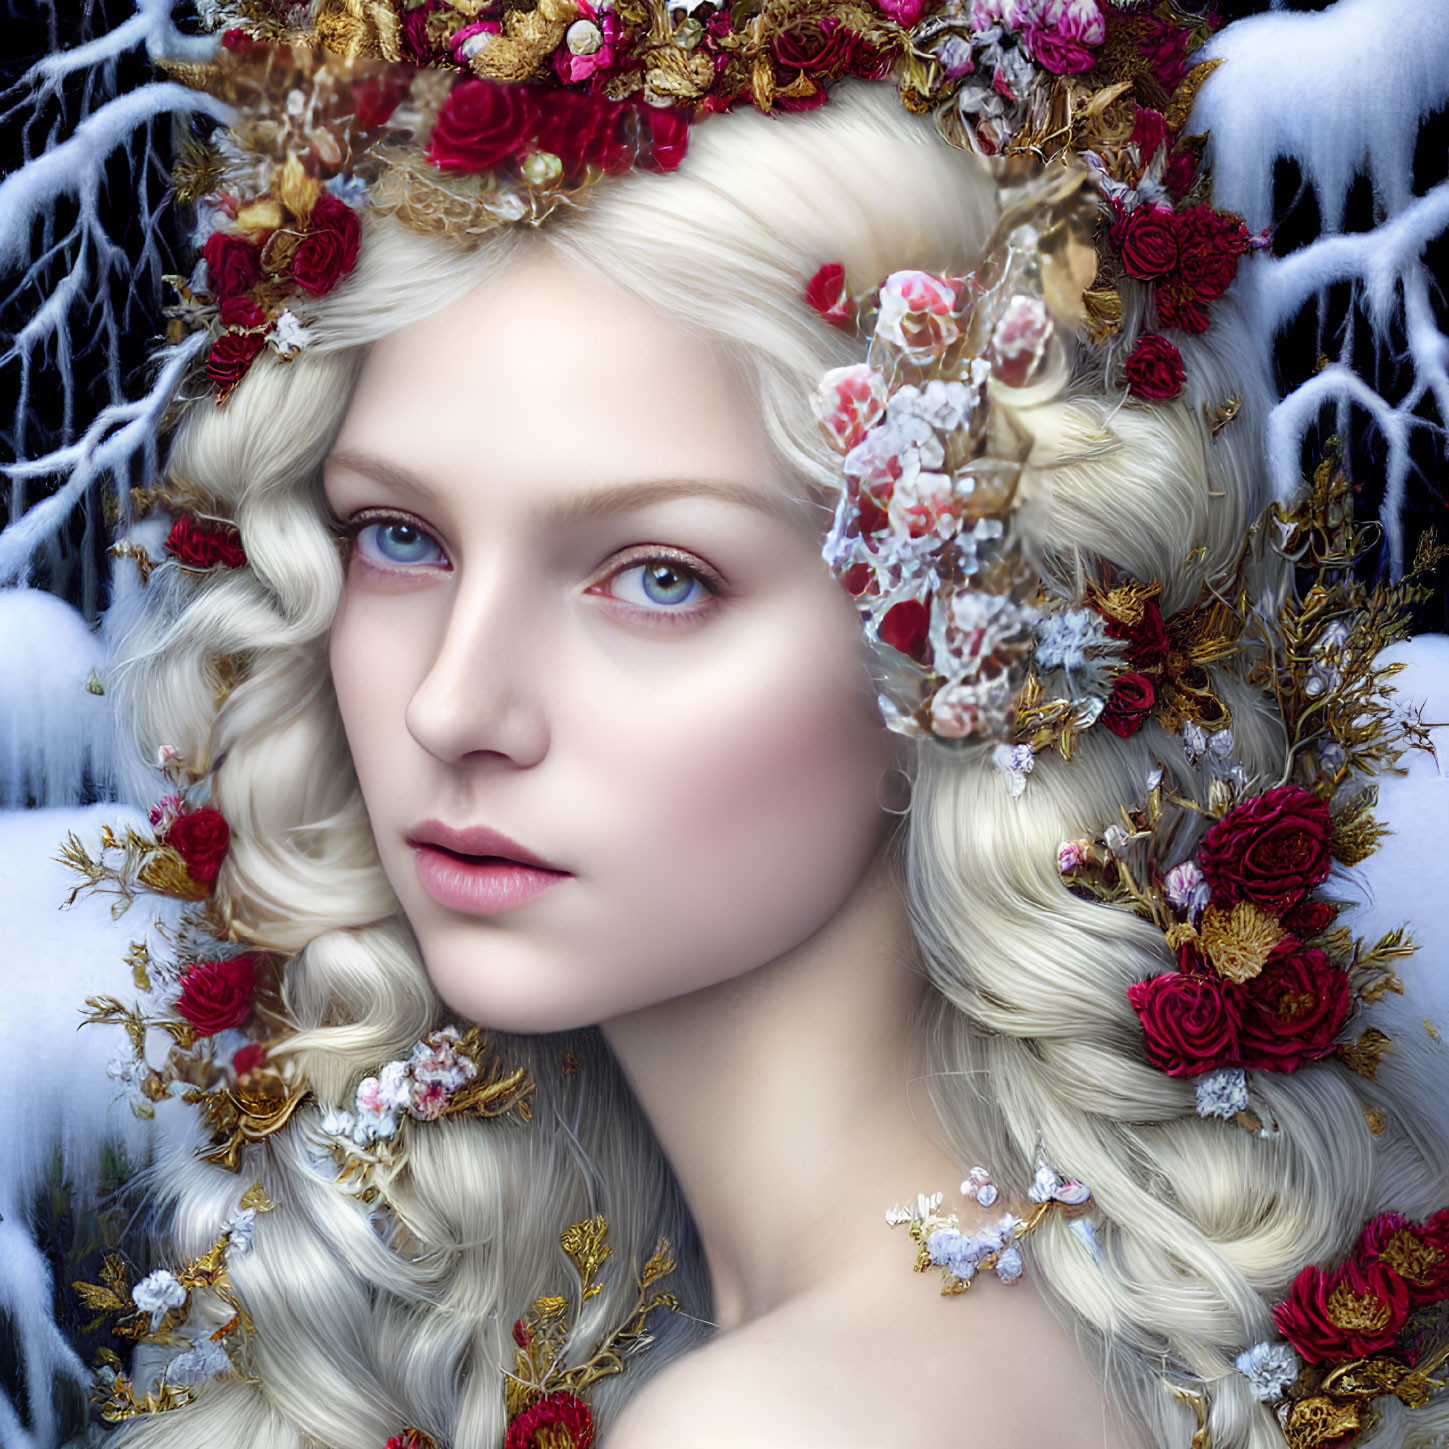 Portrait of a Woman with Blue Eyes and Blonde Curly Hair in Winter-Themed Setting